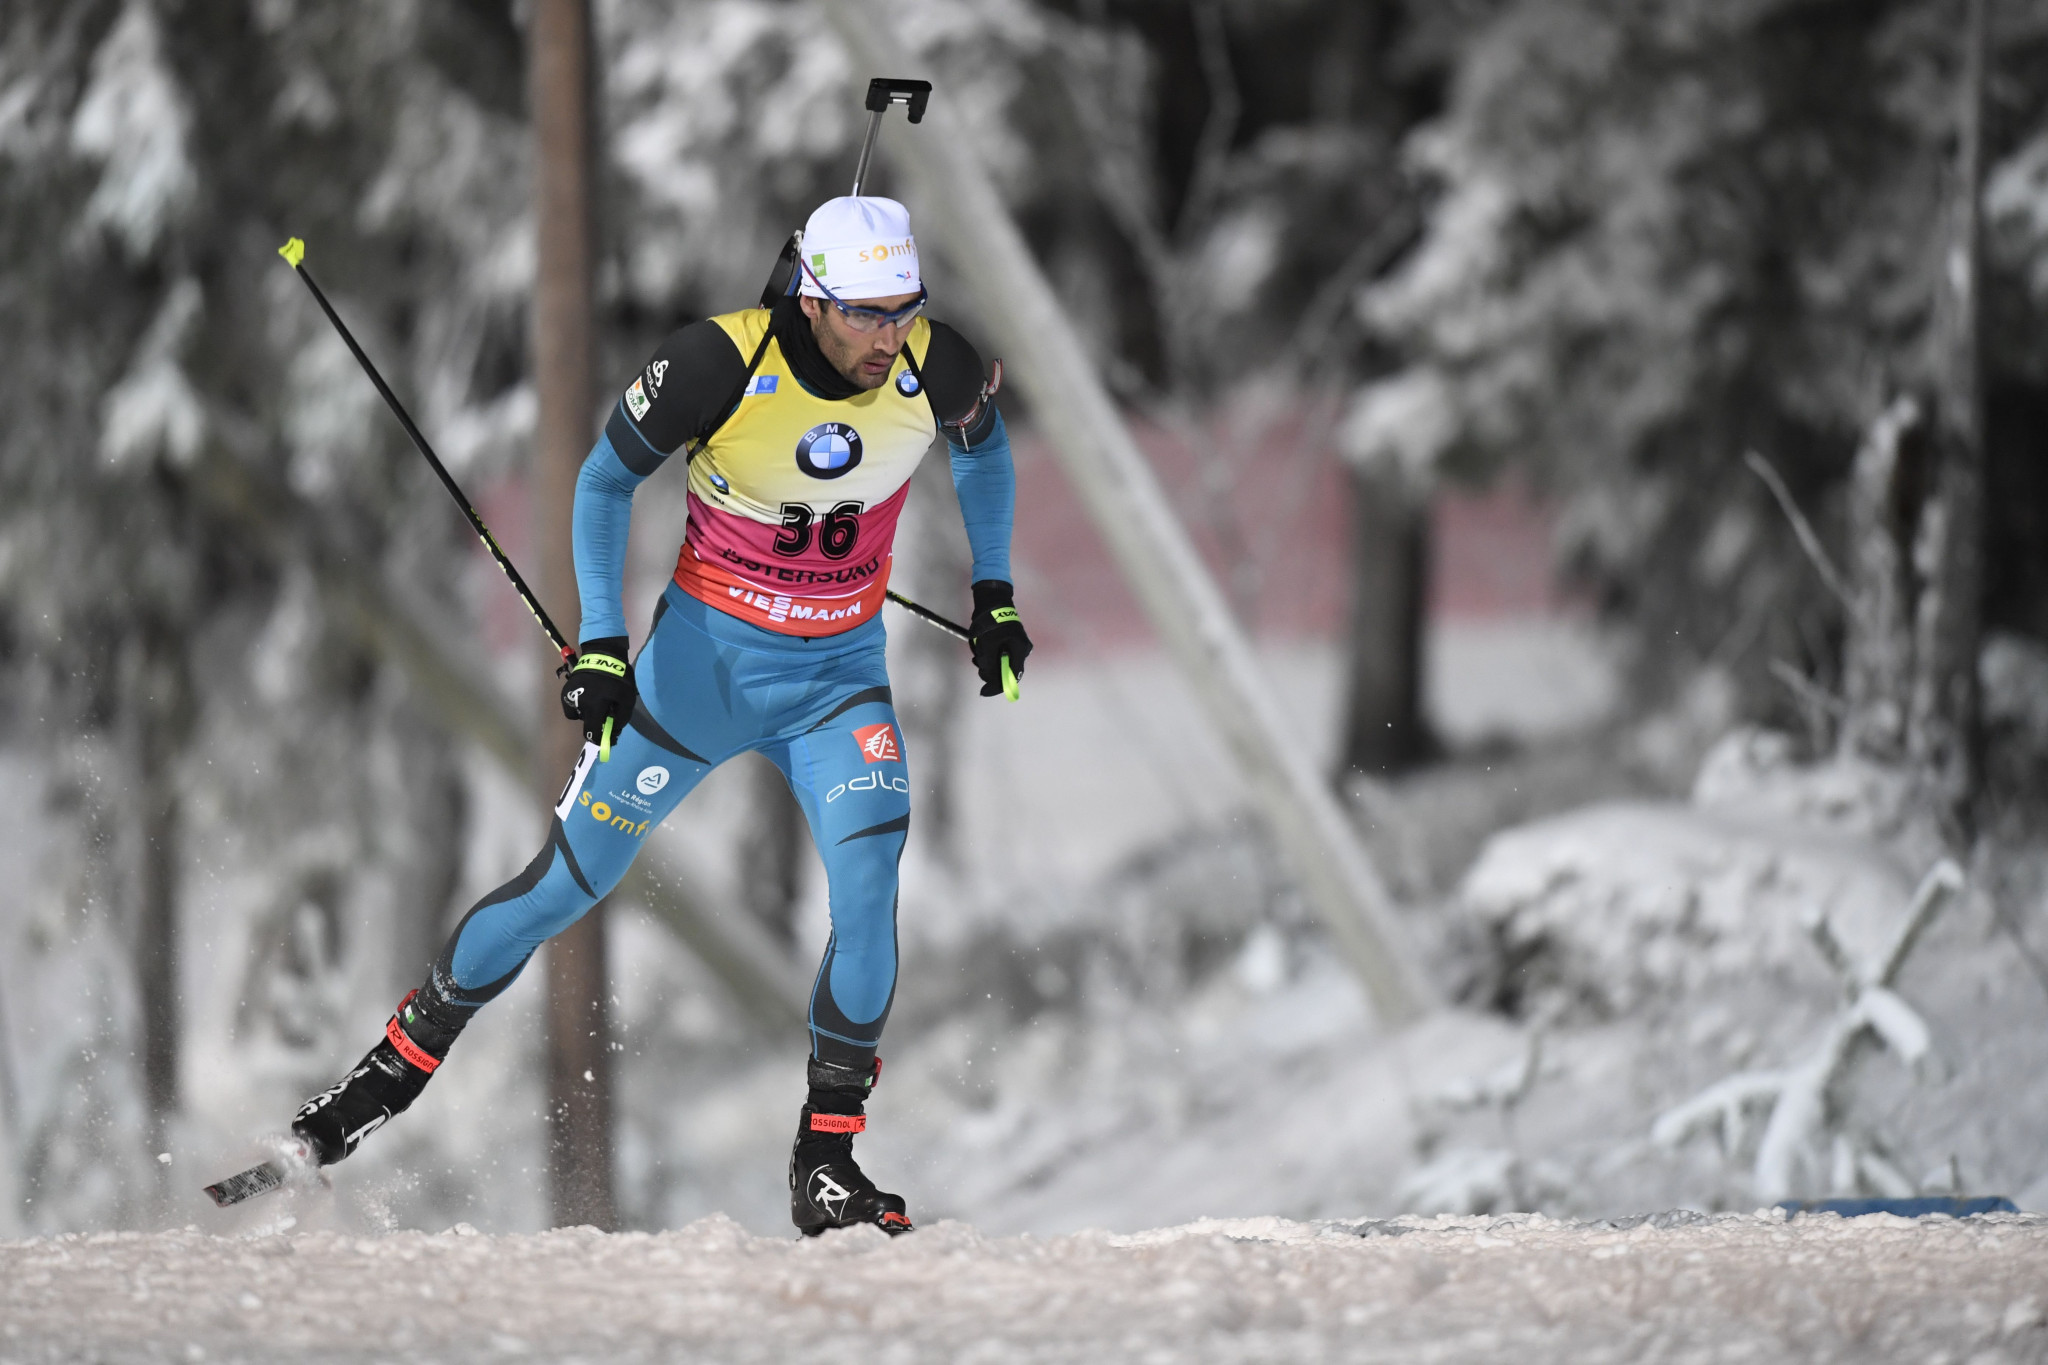 Martin Fourcade admitted he was not 100 per cent as he took bronze ©Getty Images